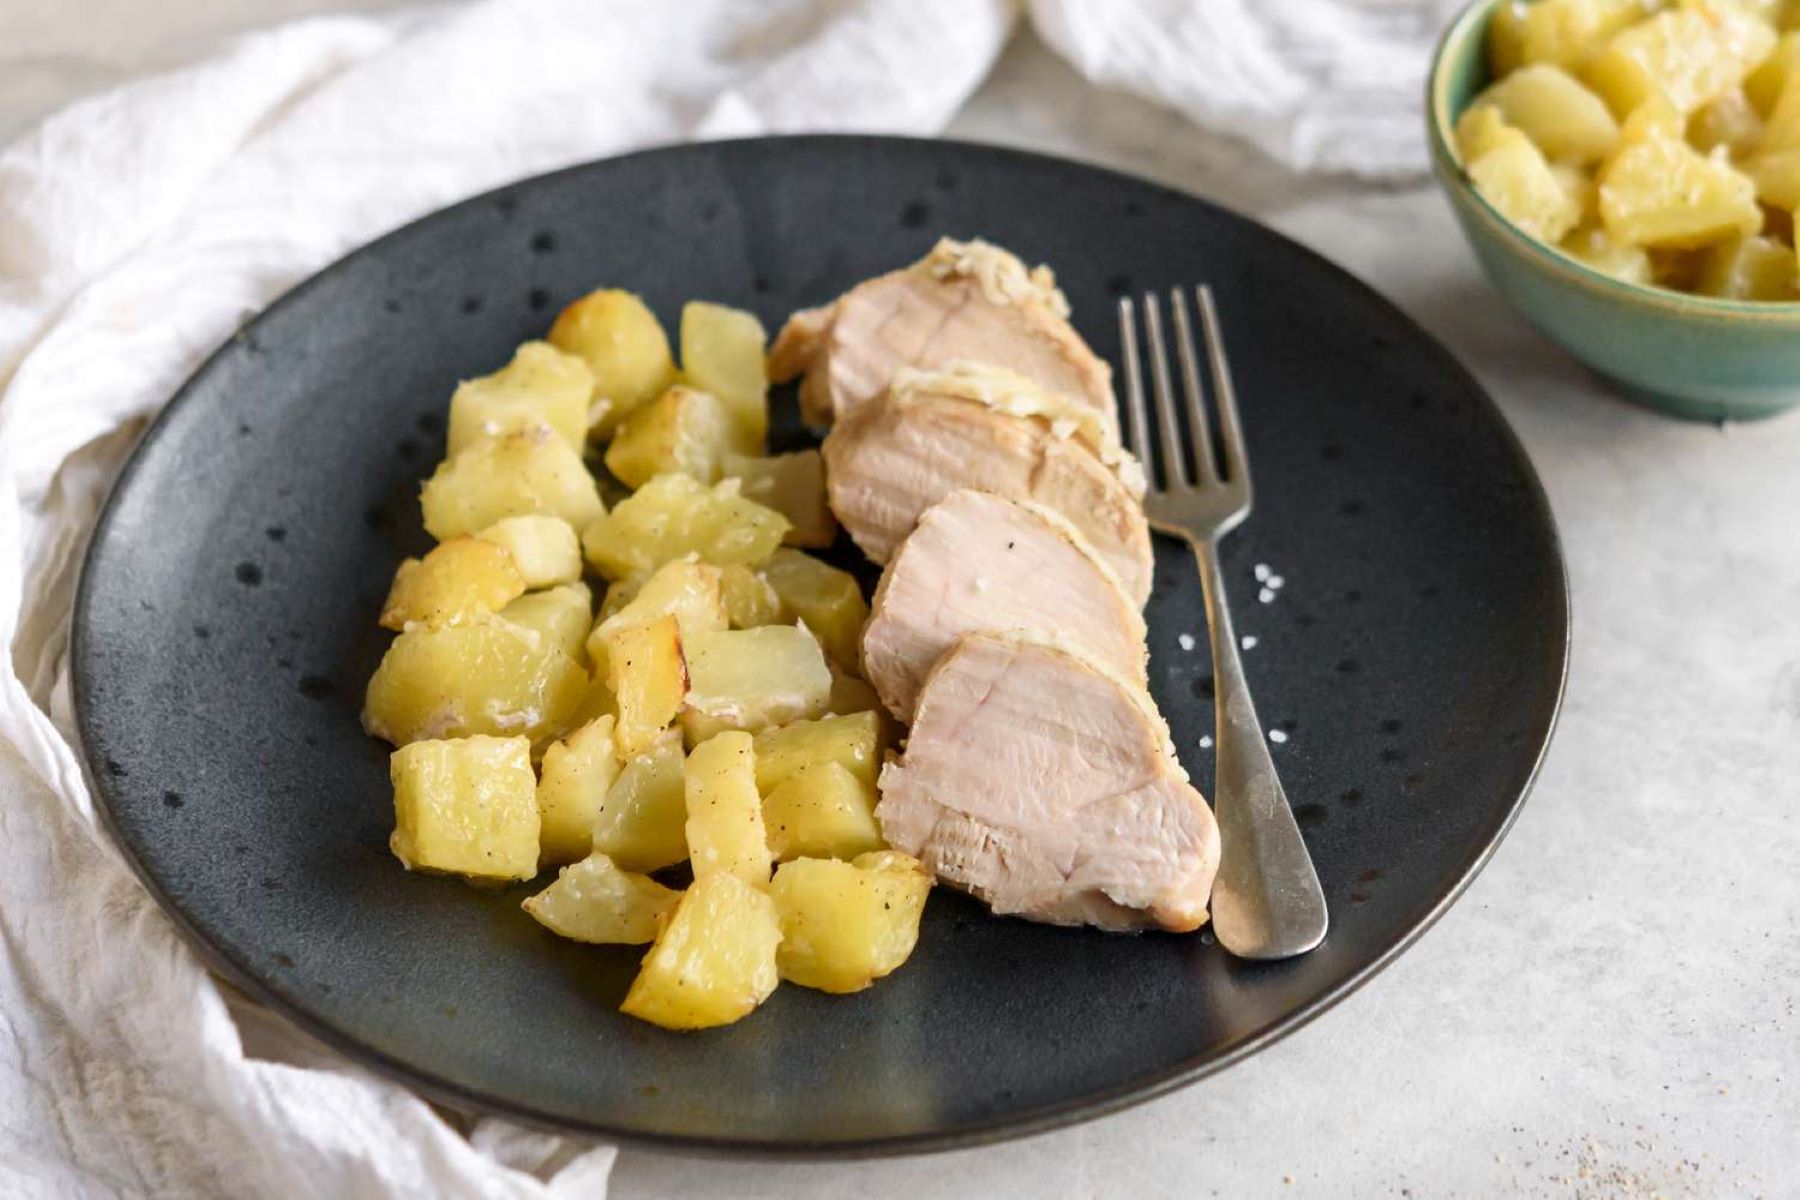 Surprising Food Combo: Chicken And Boiled Potatoes - You Won't Believe The Results!